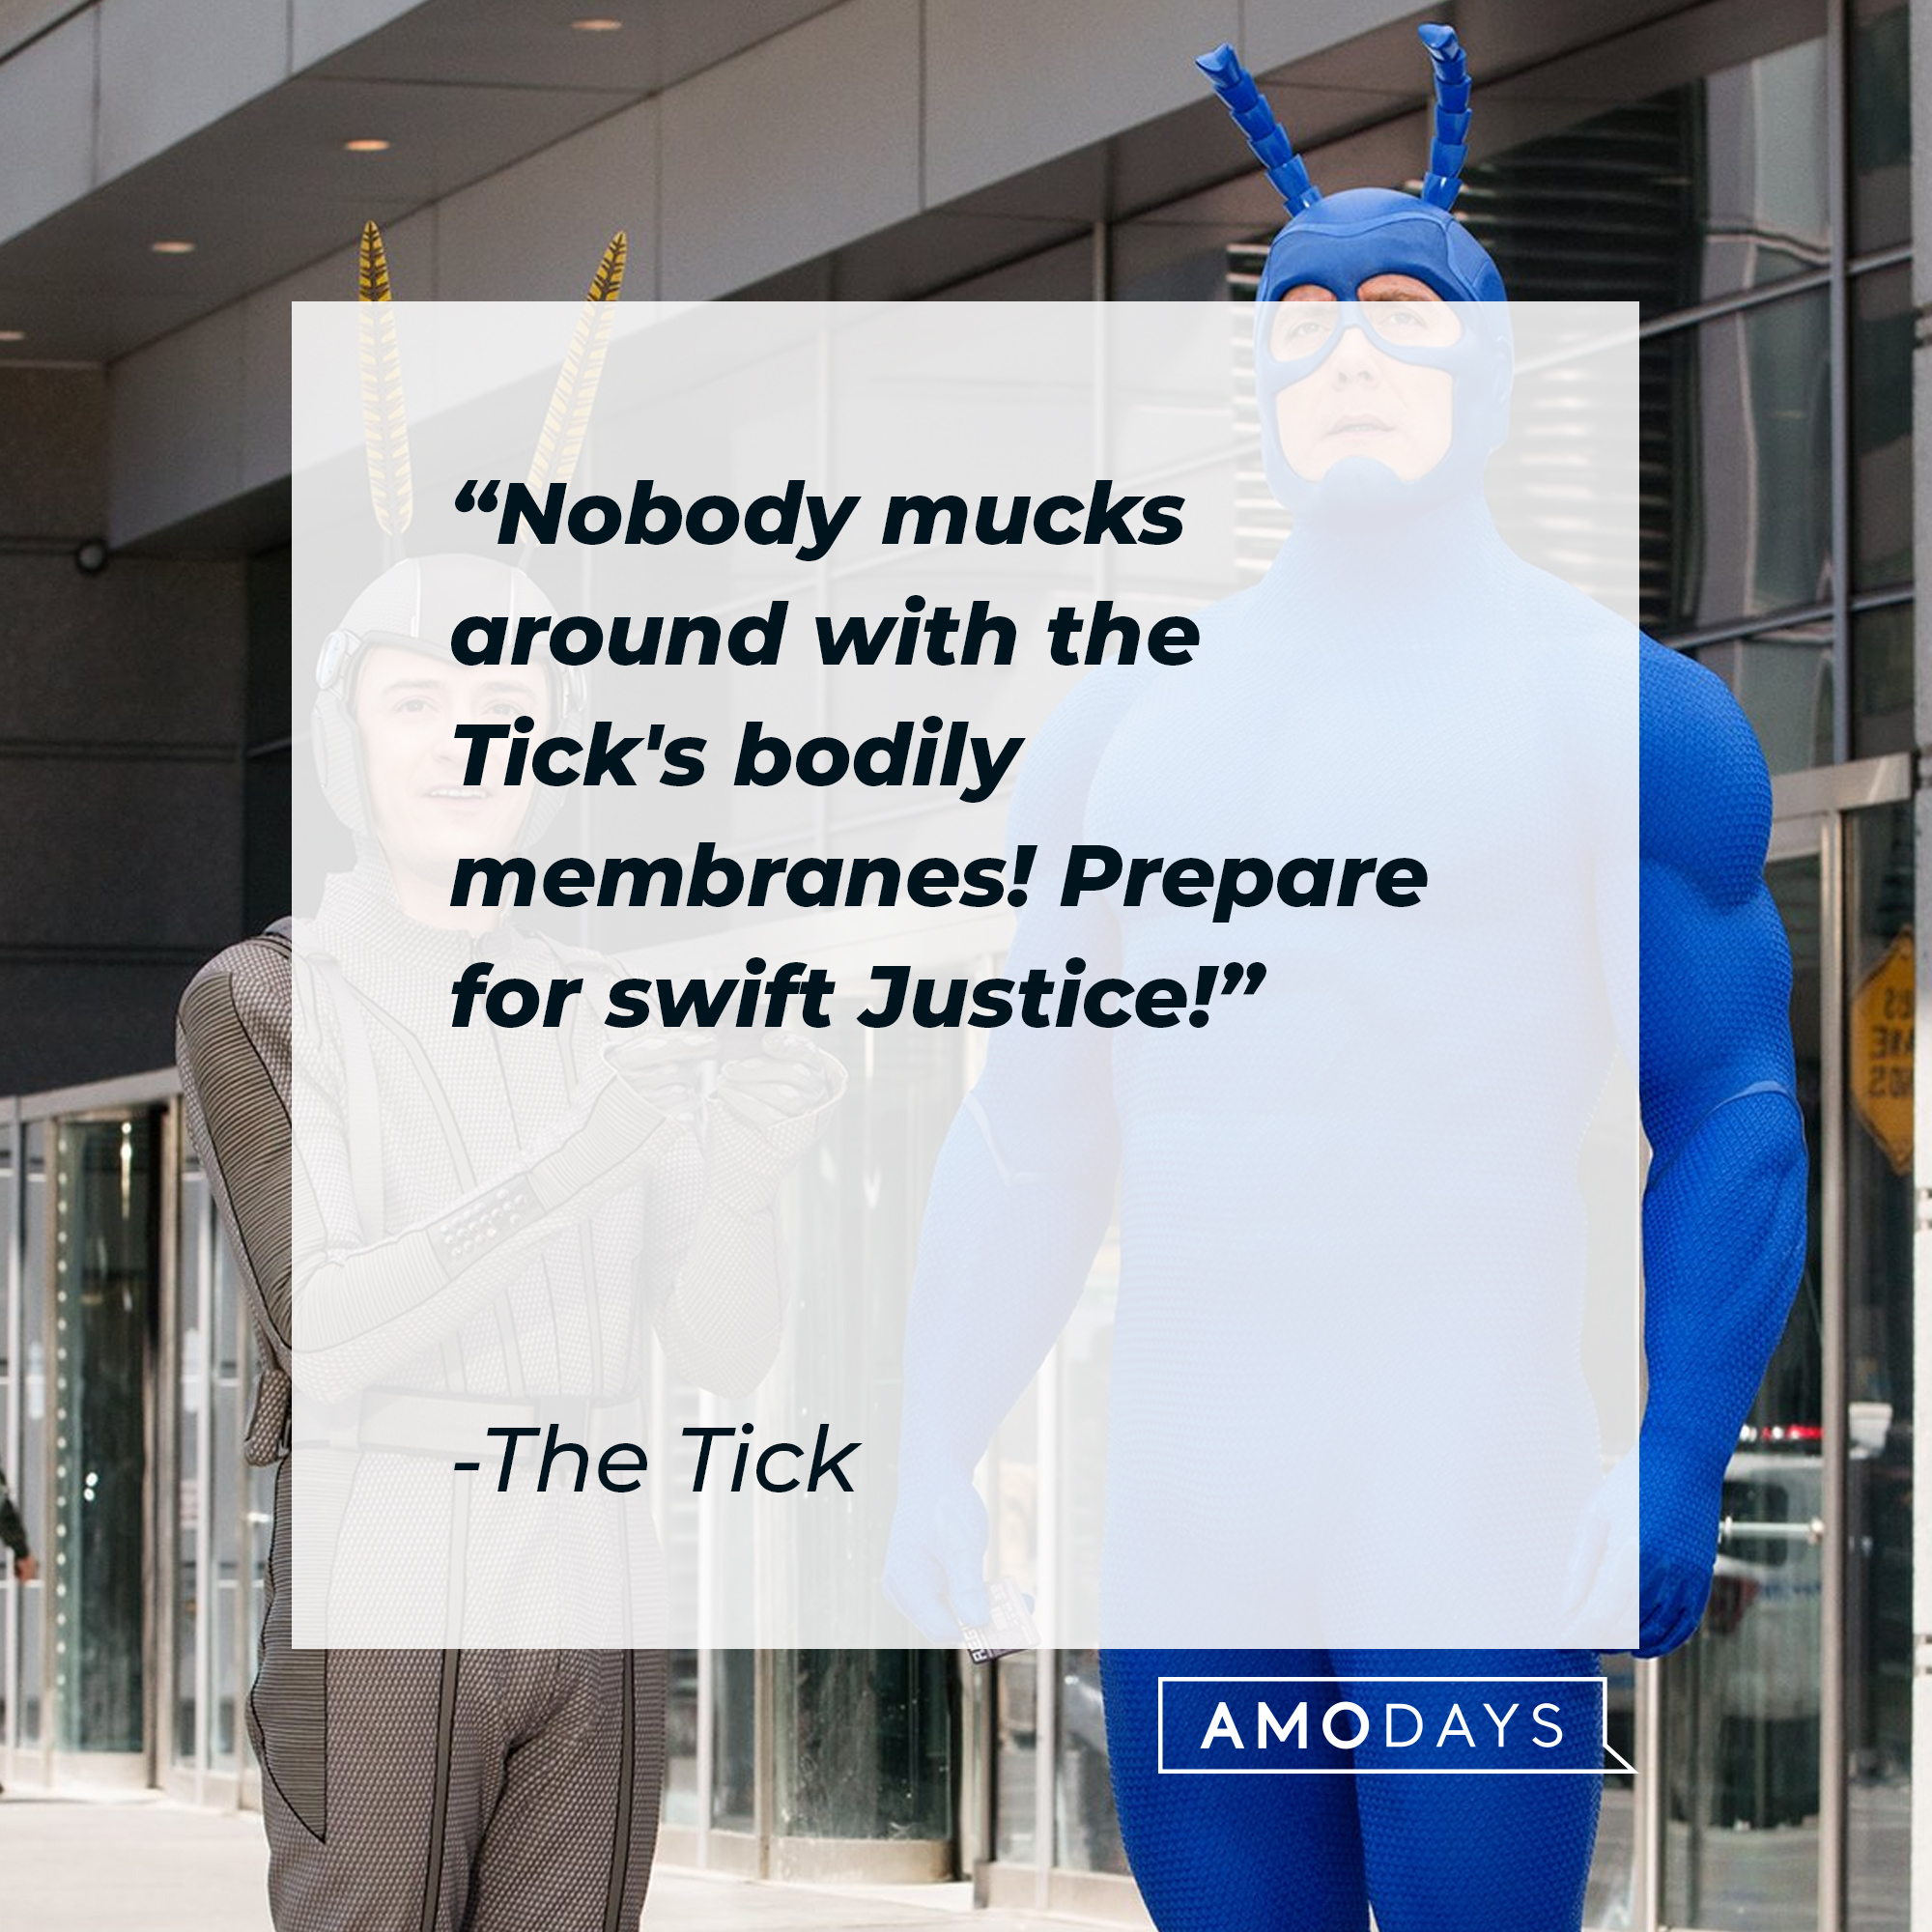 The Tick's quote: "Nobody mucks around with the Tick's bodily membranes! Prepare for swift Justice!" | Source: Facebook.com/TheTick